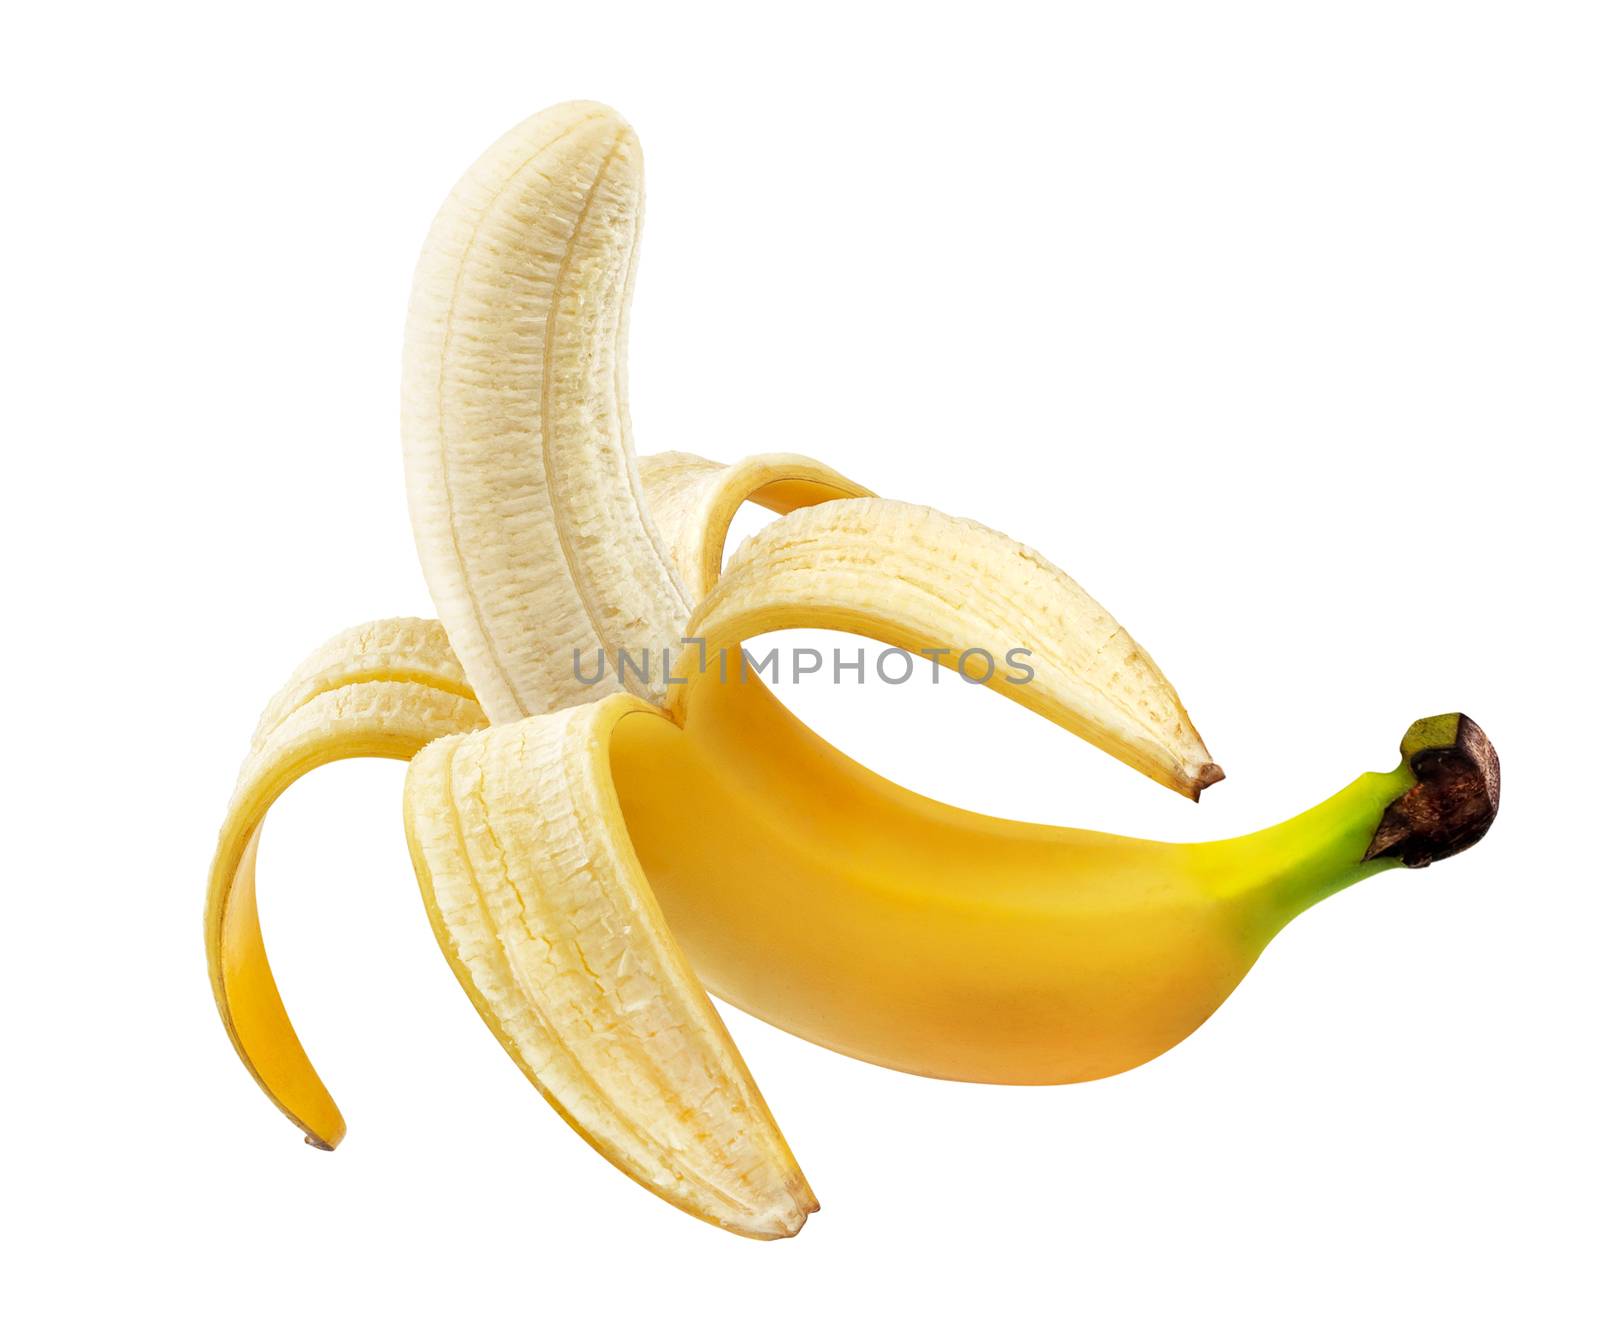 One open peeled banana isolated on white background with clipping path